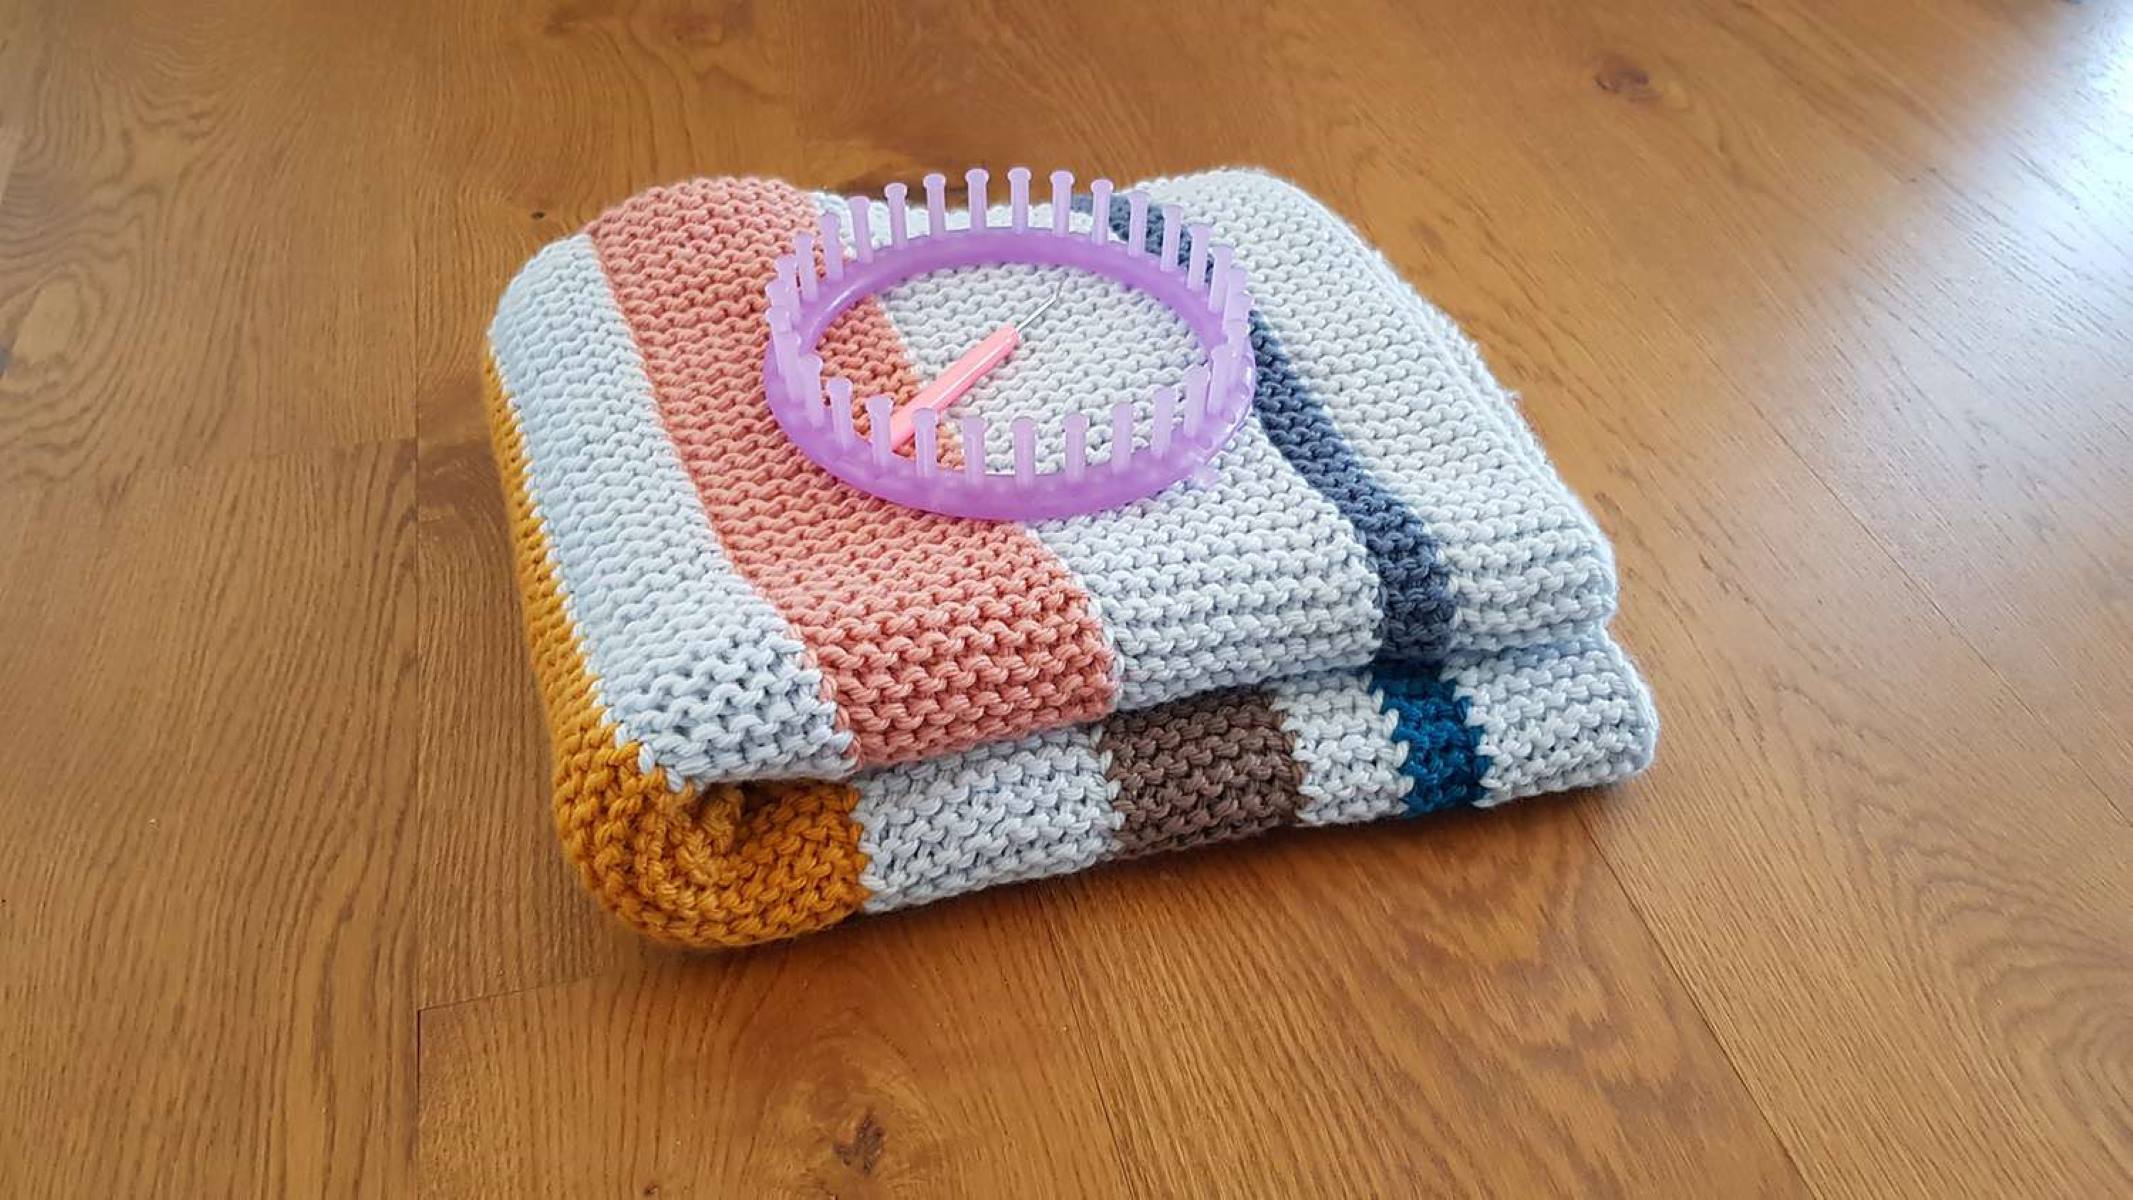 How To Knit A Baby Blanket On A Round Loom